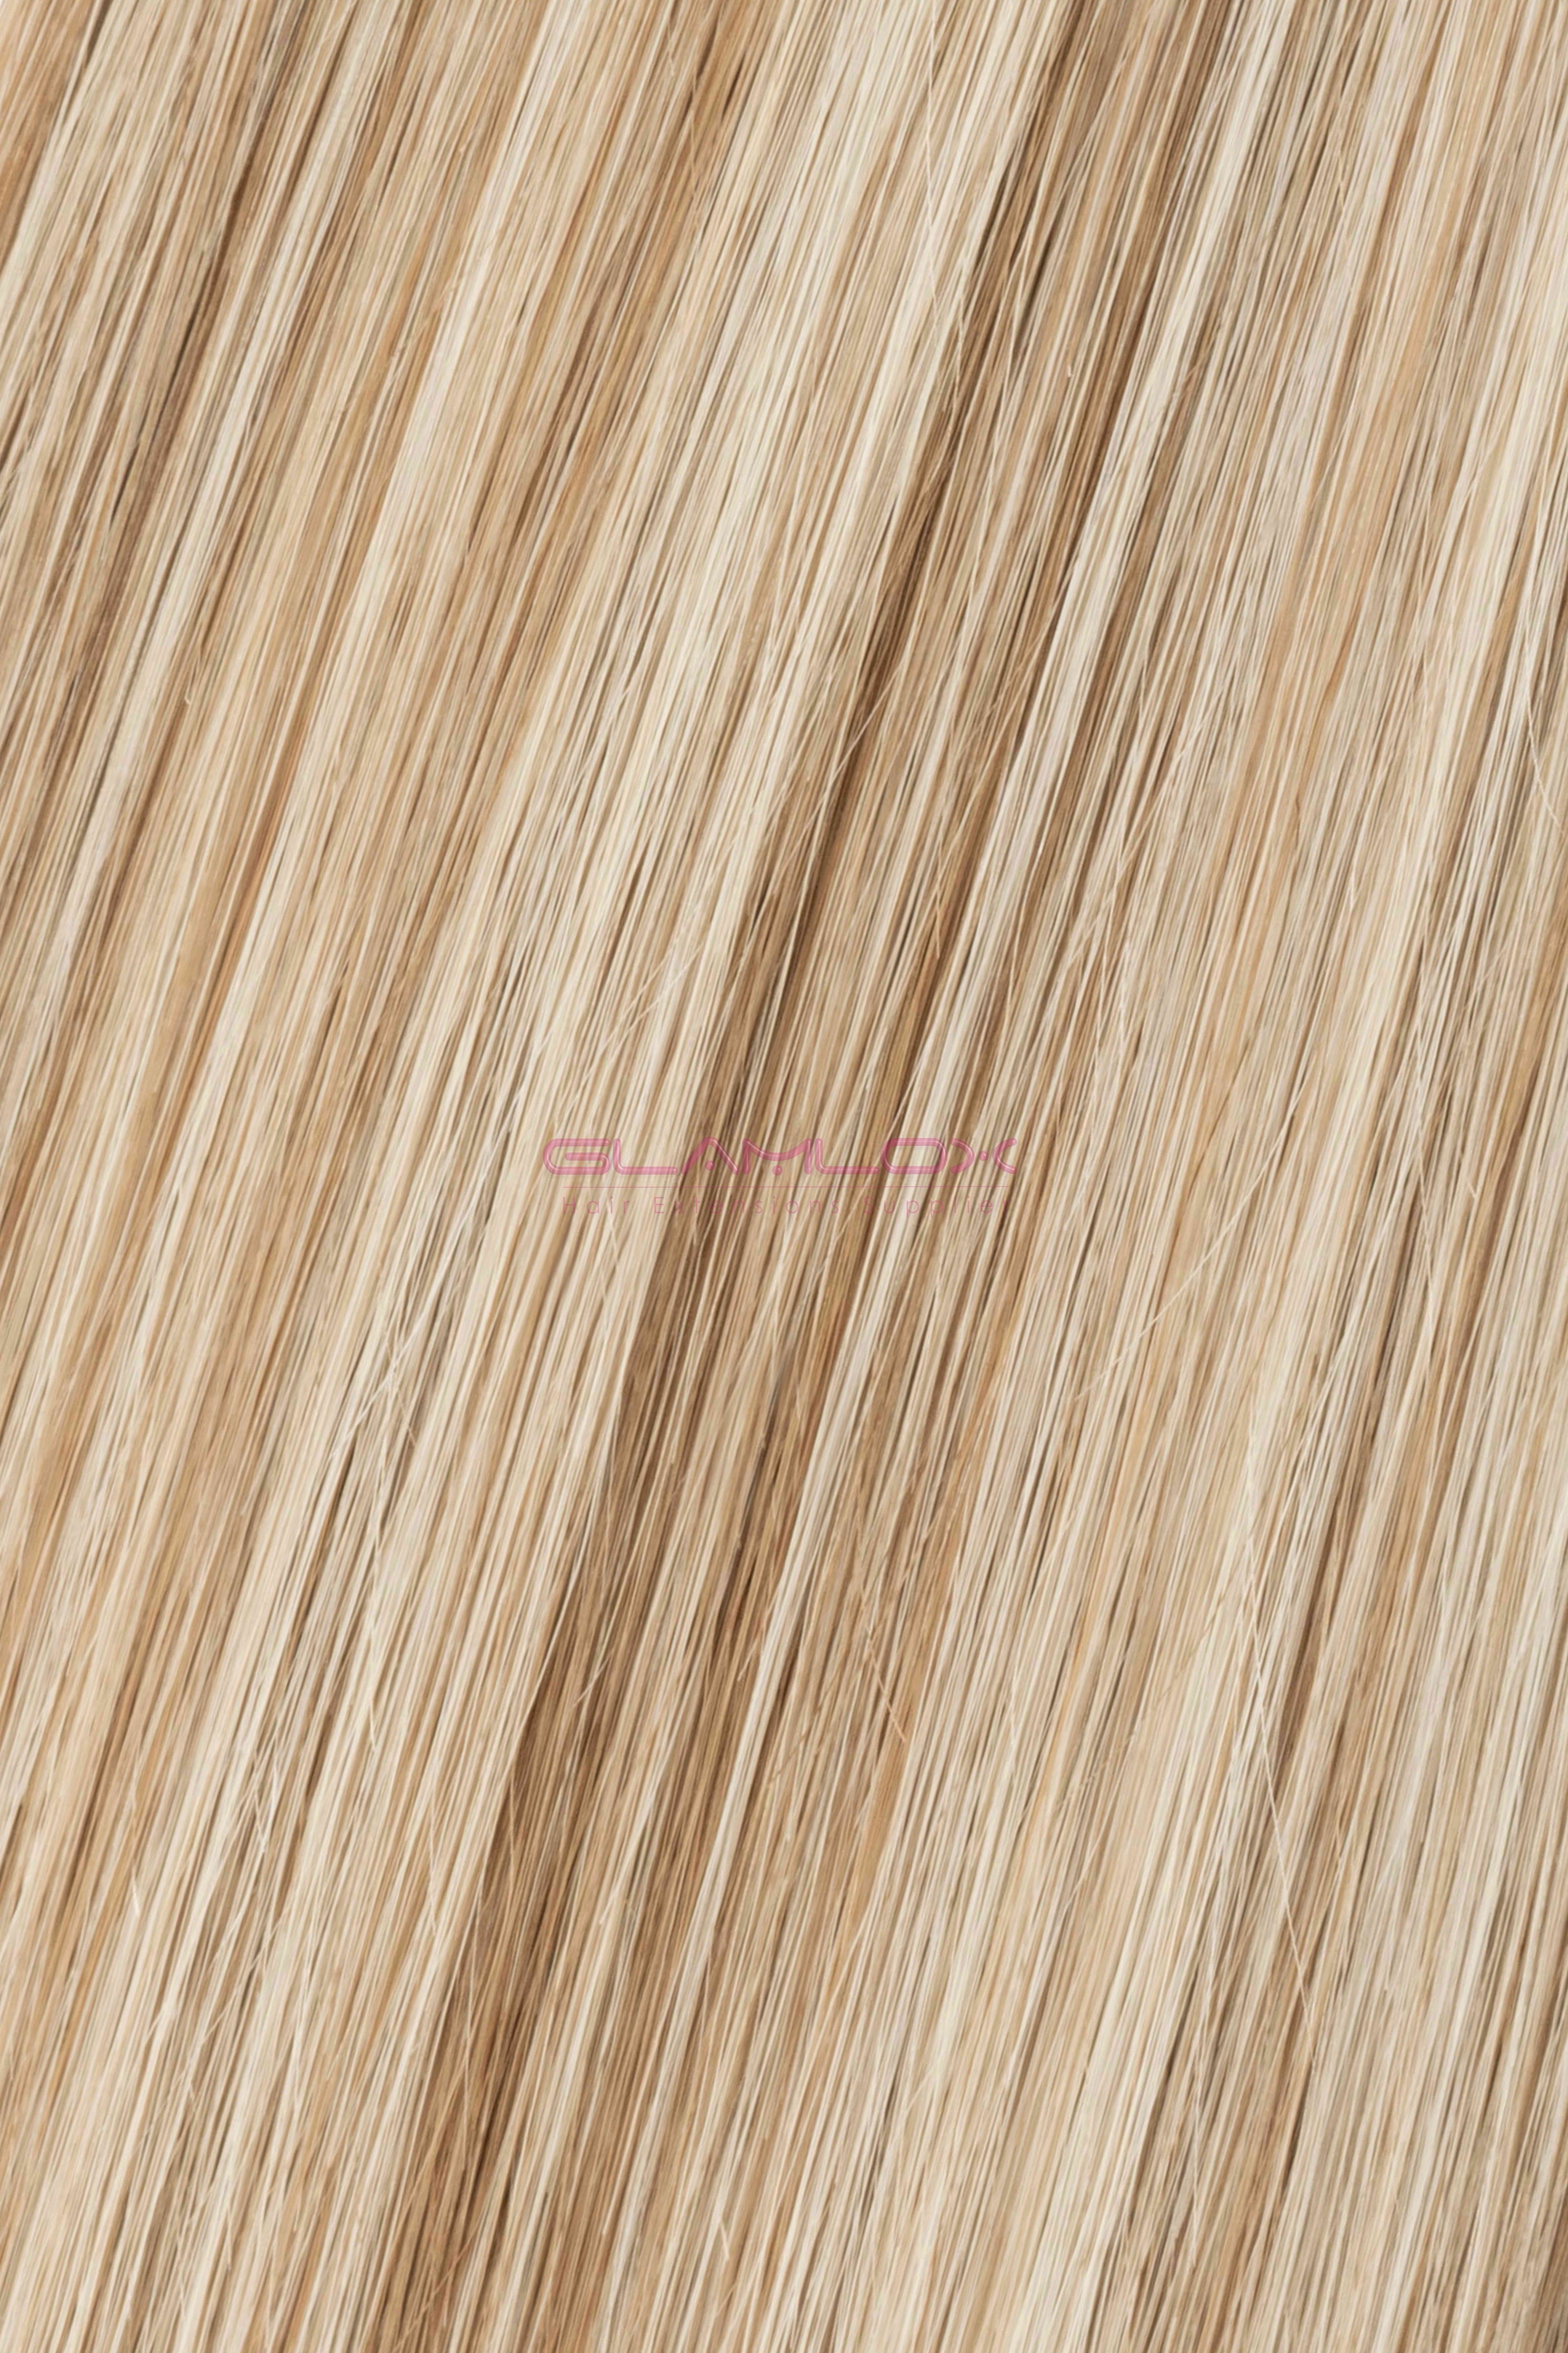 18" Nano Ring Hair Extensions - Russian Mongolian Double Drawn Remy Human Hair - 100 Strands